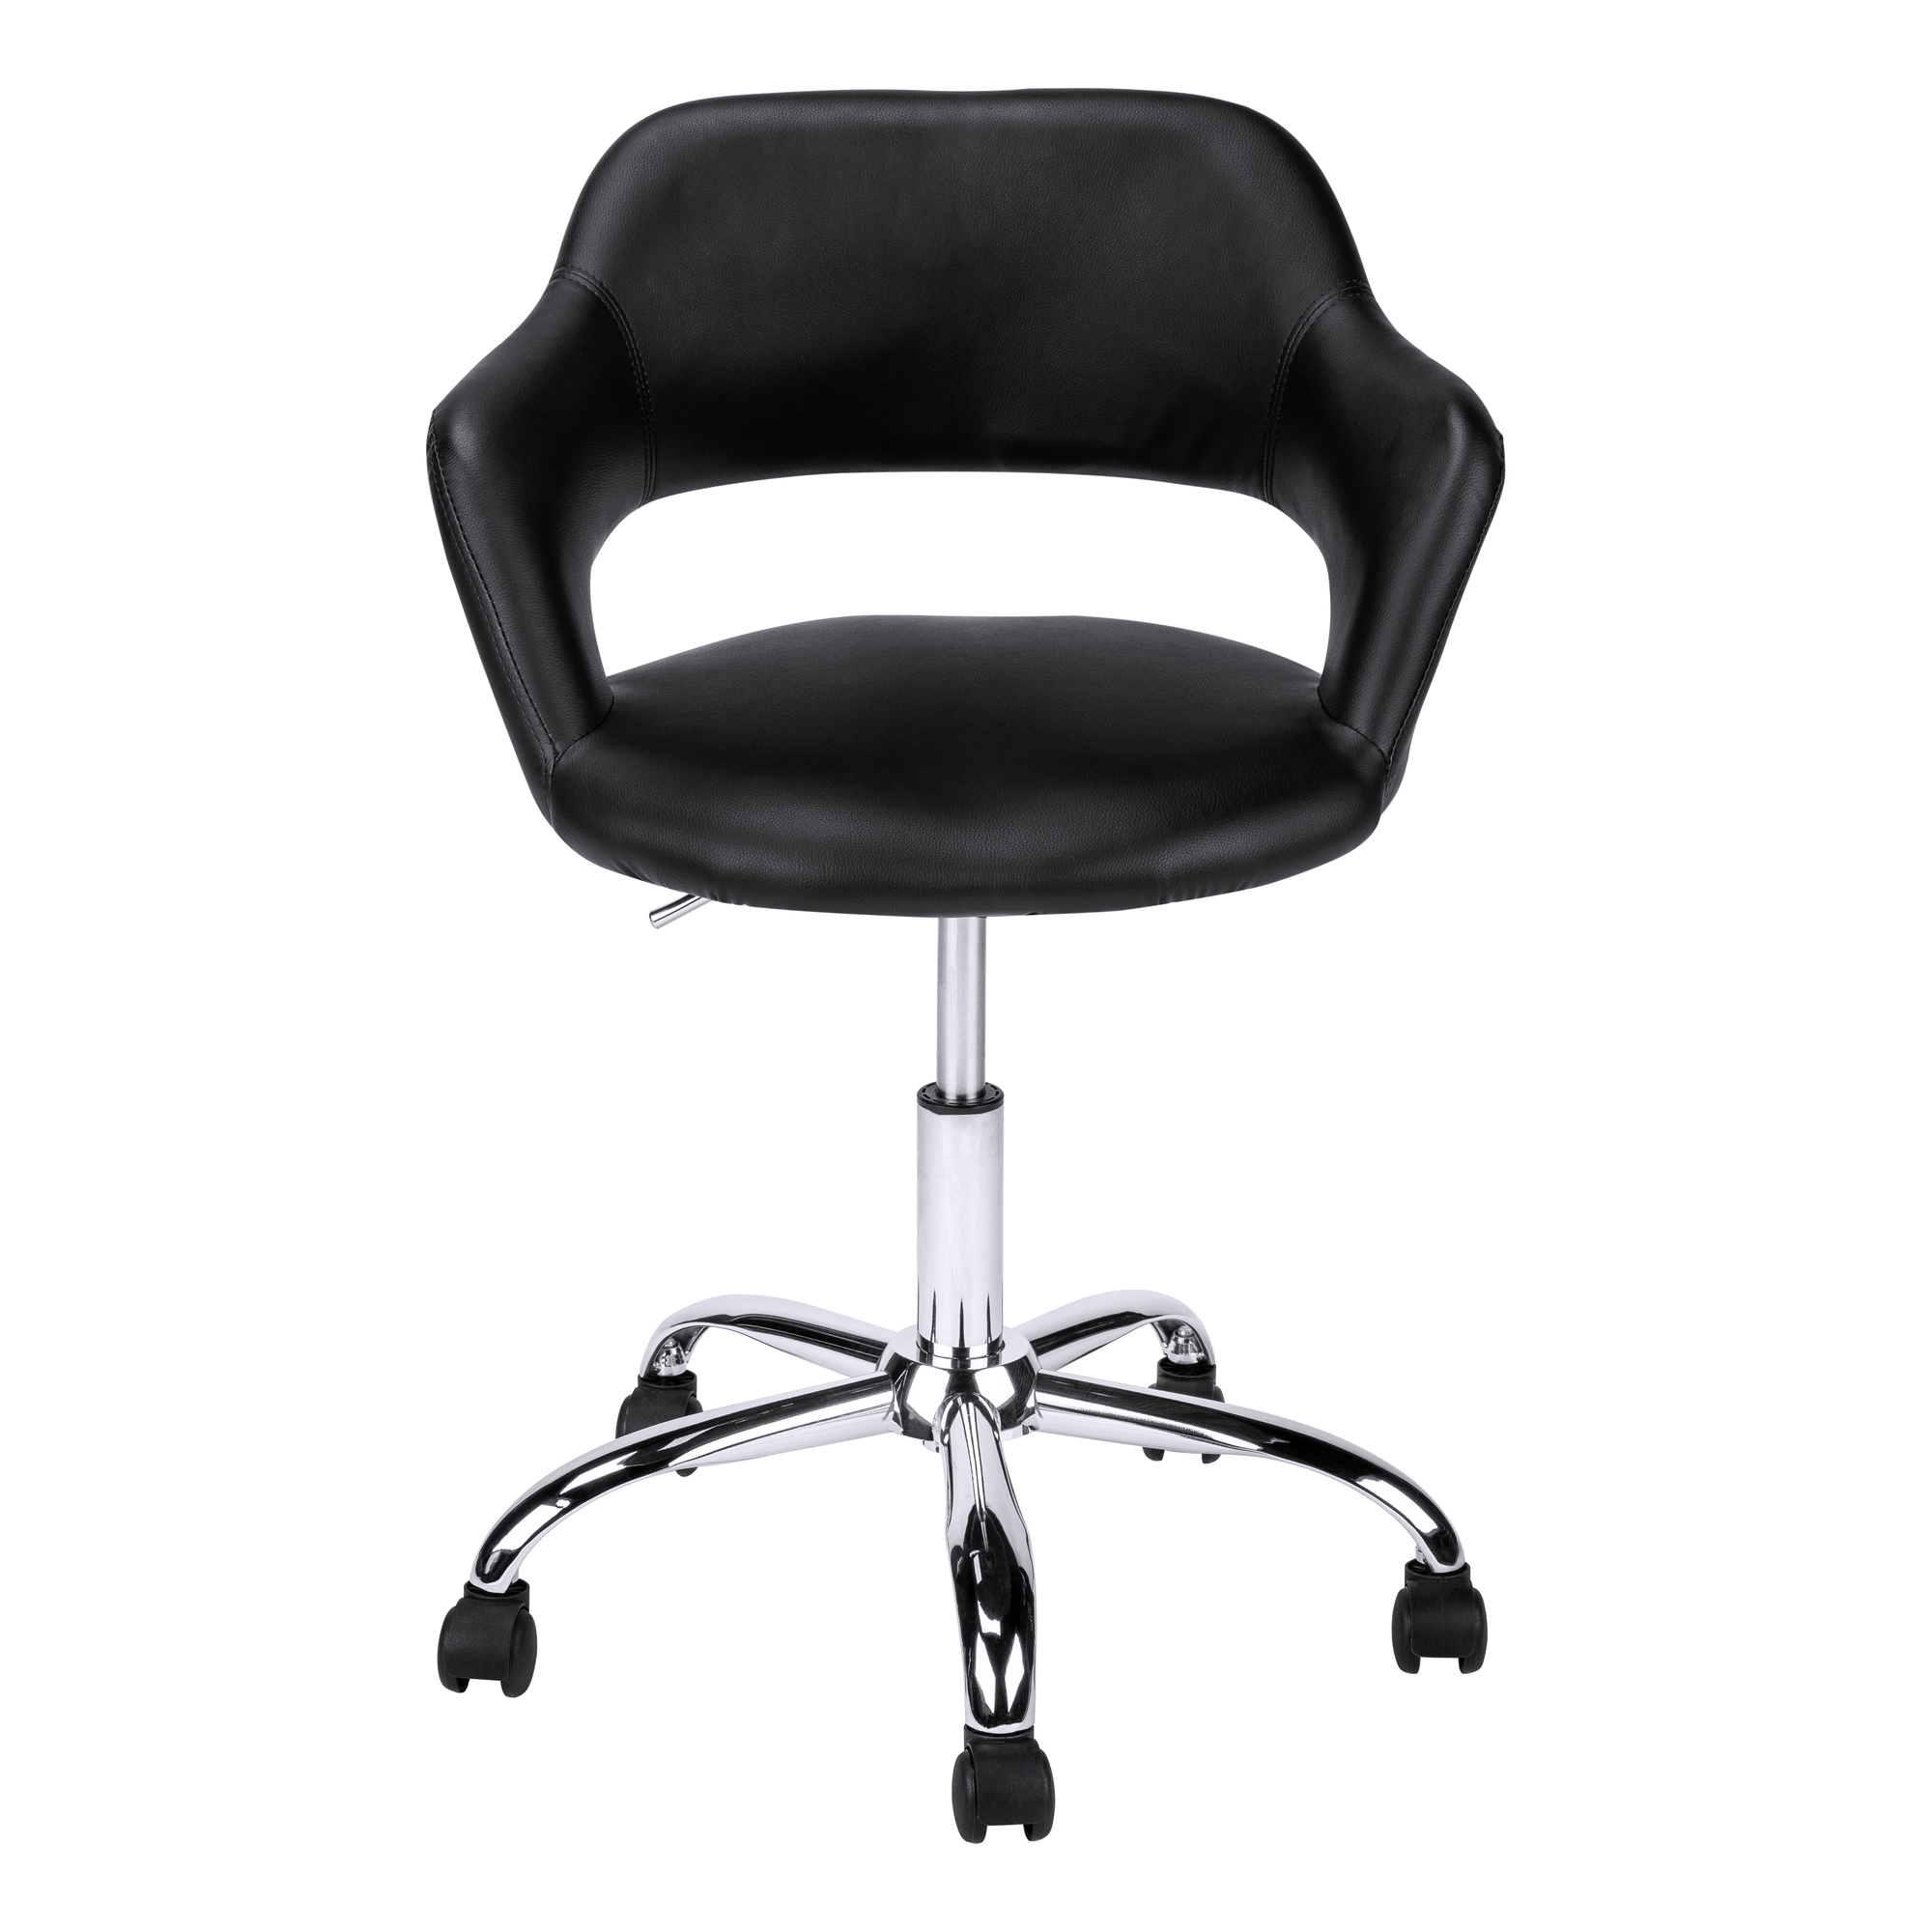 Black Faux Leather Seat Swivel Adjustable Task Chair Leather Back-333467-1